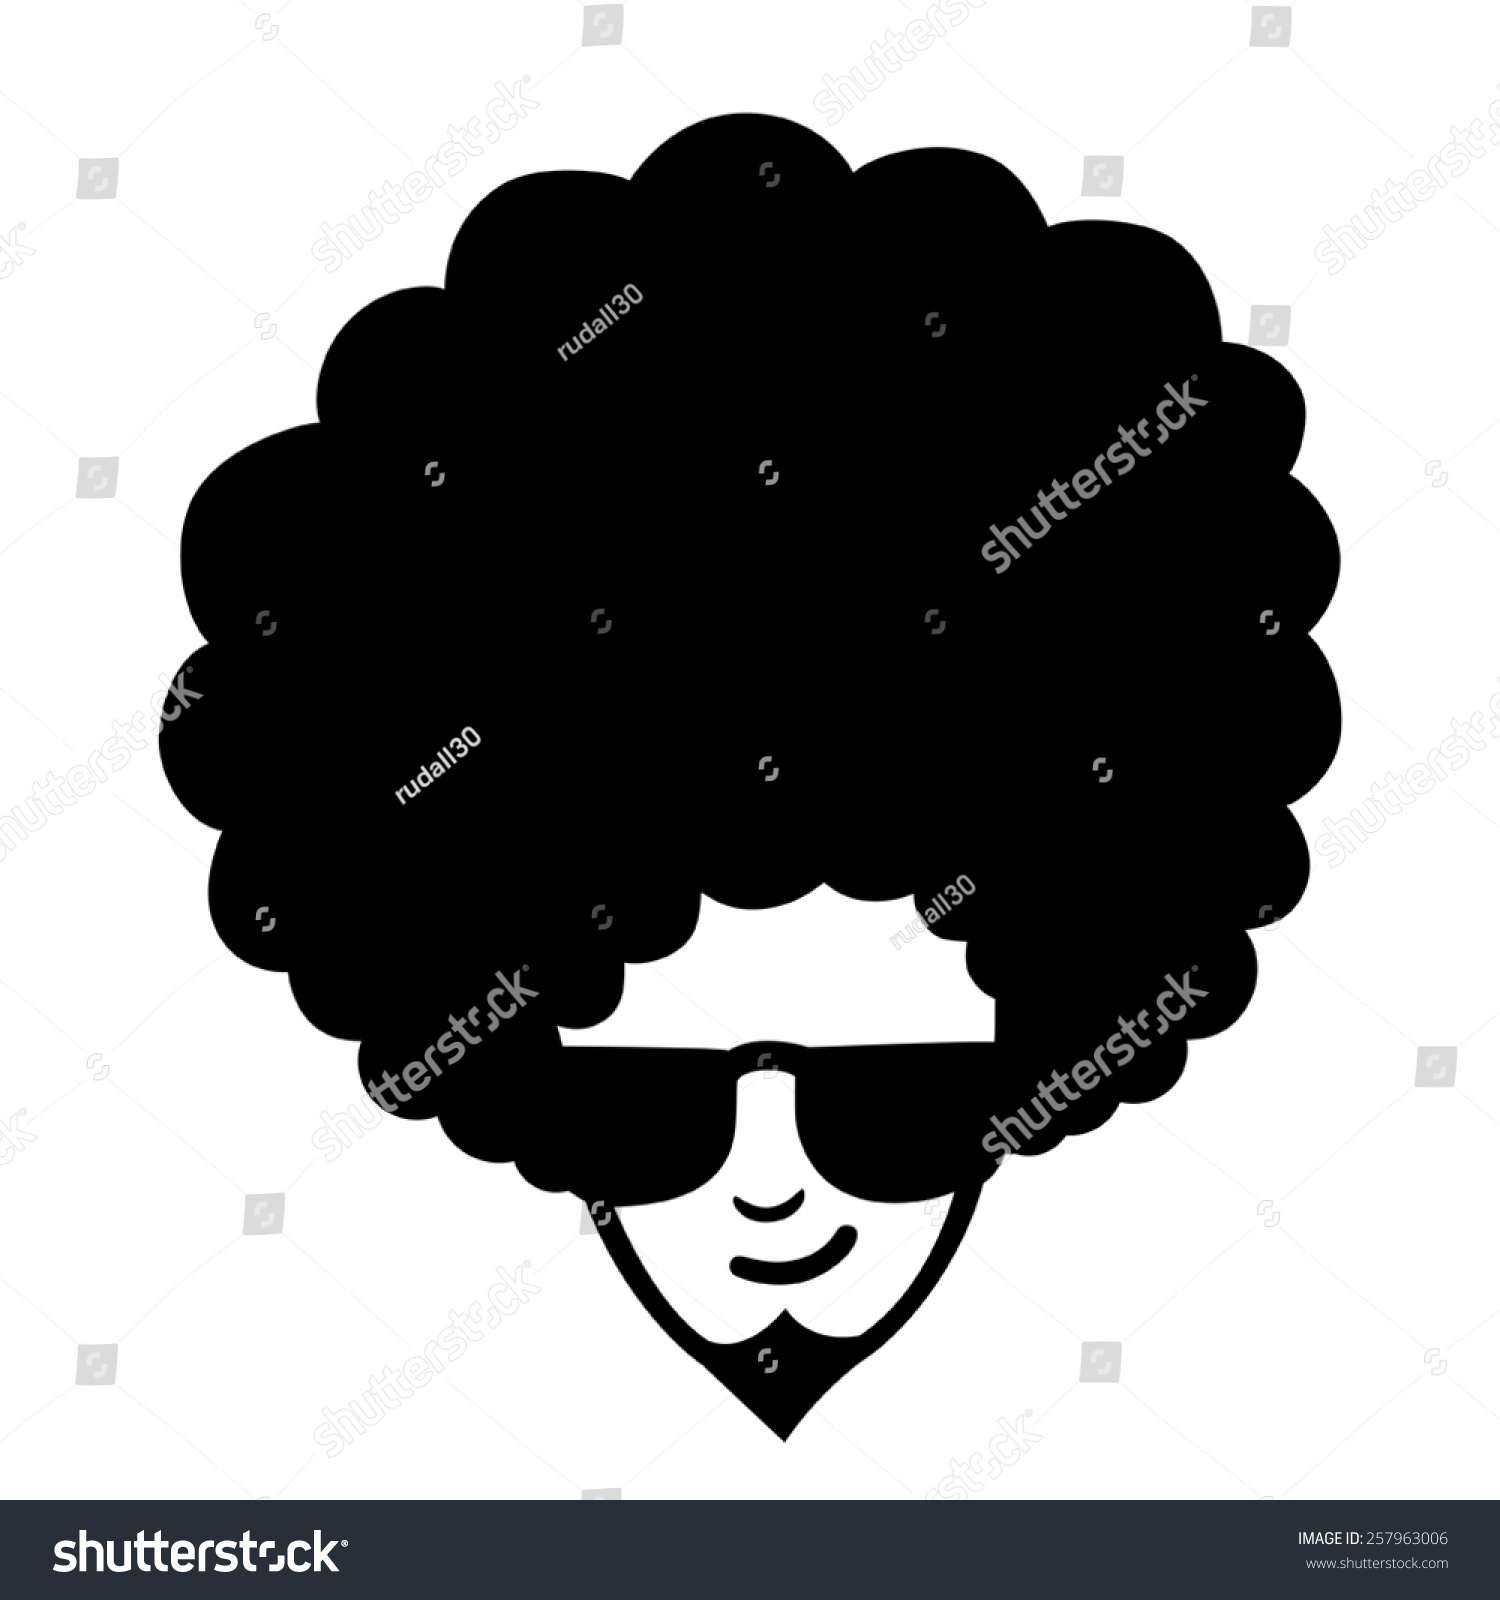 SVG of Doodle illustration of man face with frizzy hair svg